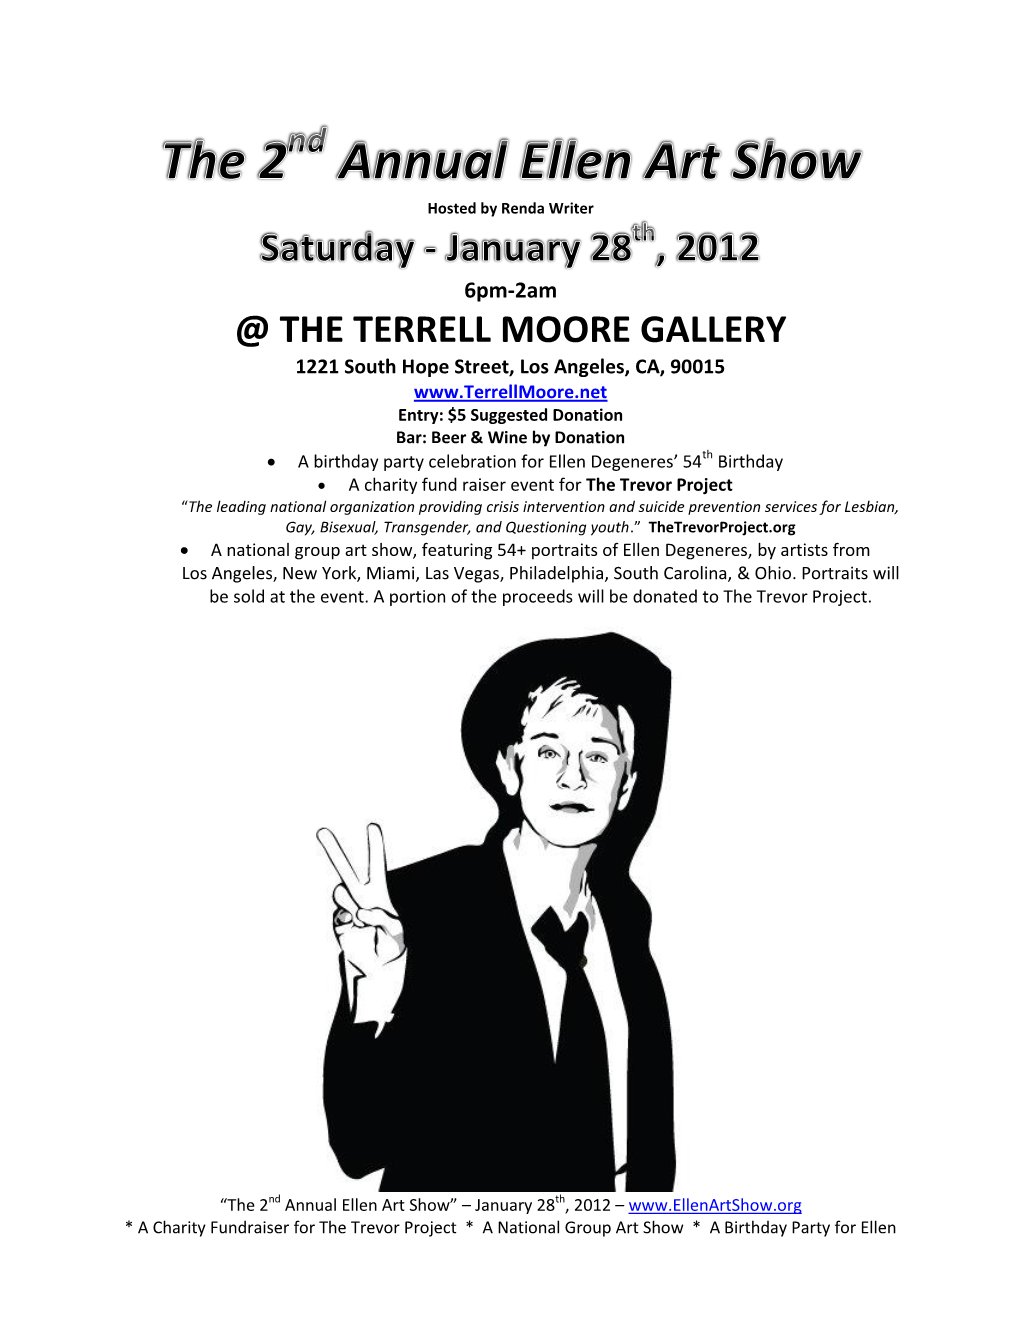 @ the Terrell Moore Gallery